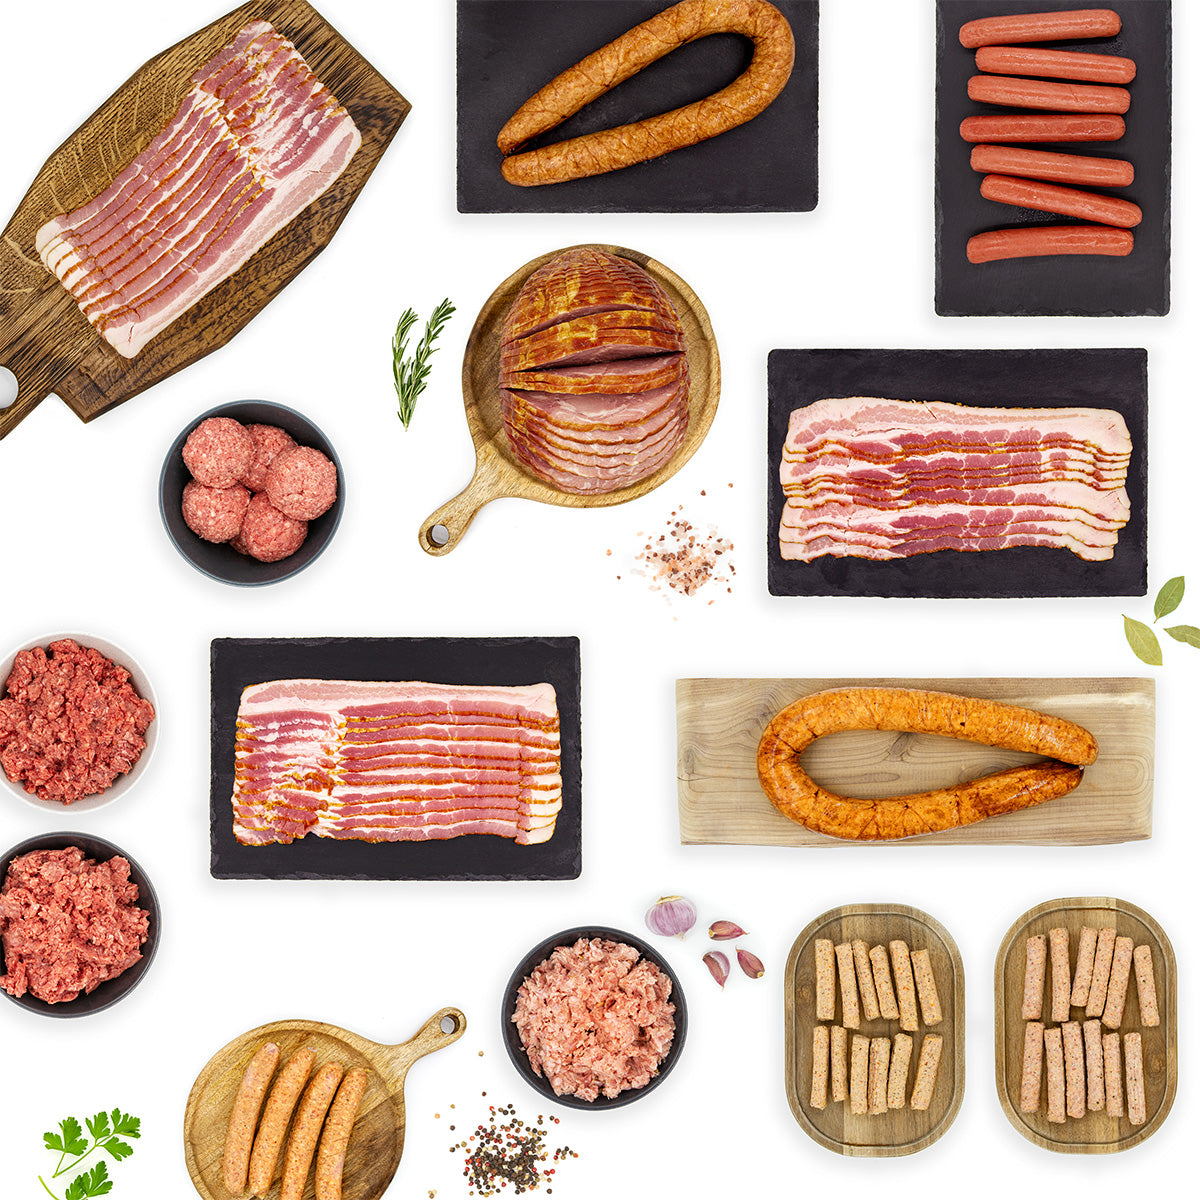 The Ultimate No Sugar Meal Prep Bundle lifestyle image featuring bacon, connected sausage, breakfast sausage links, ground sausage, ground beef and bison, ham, and hot dogs